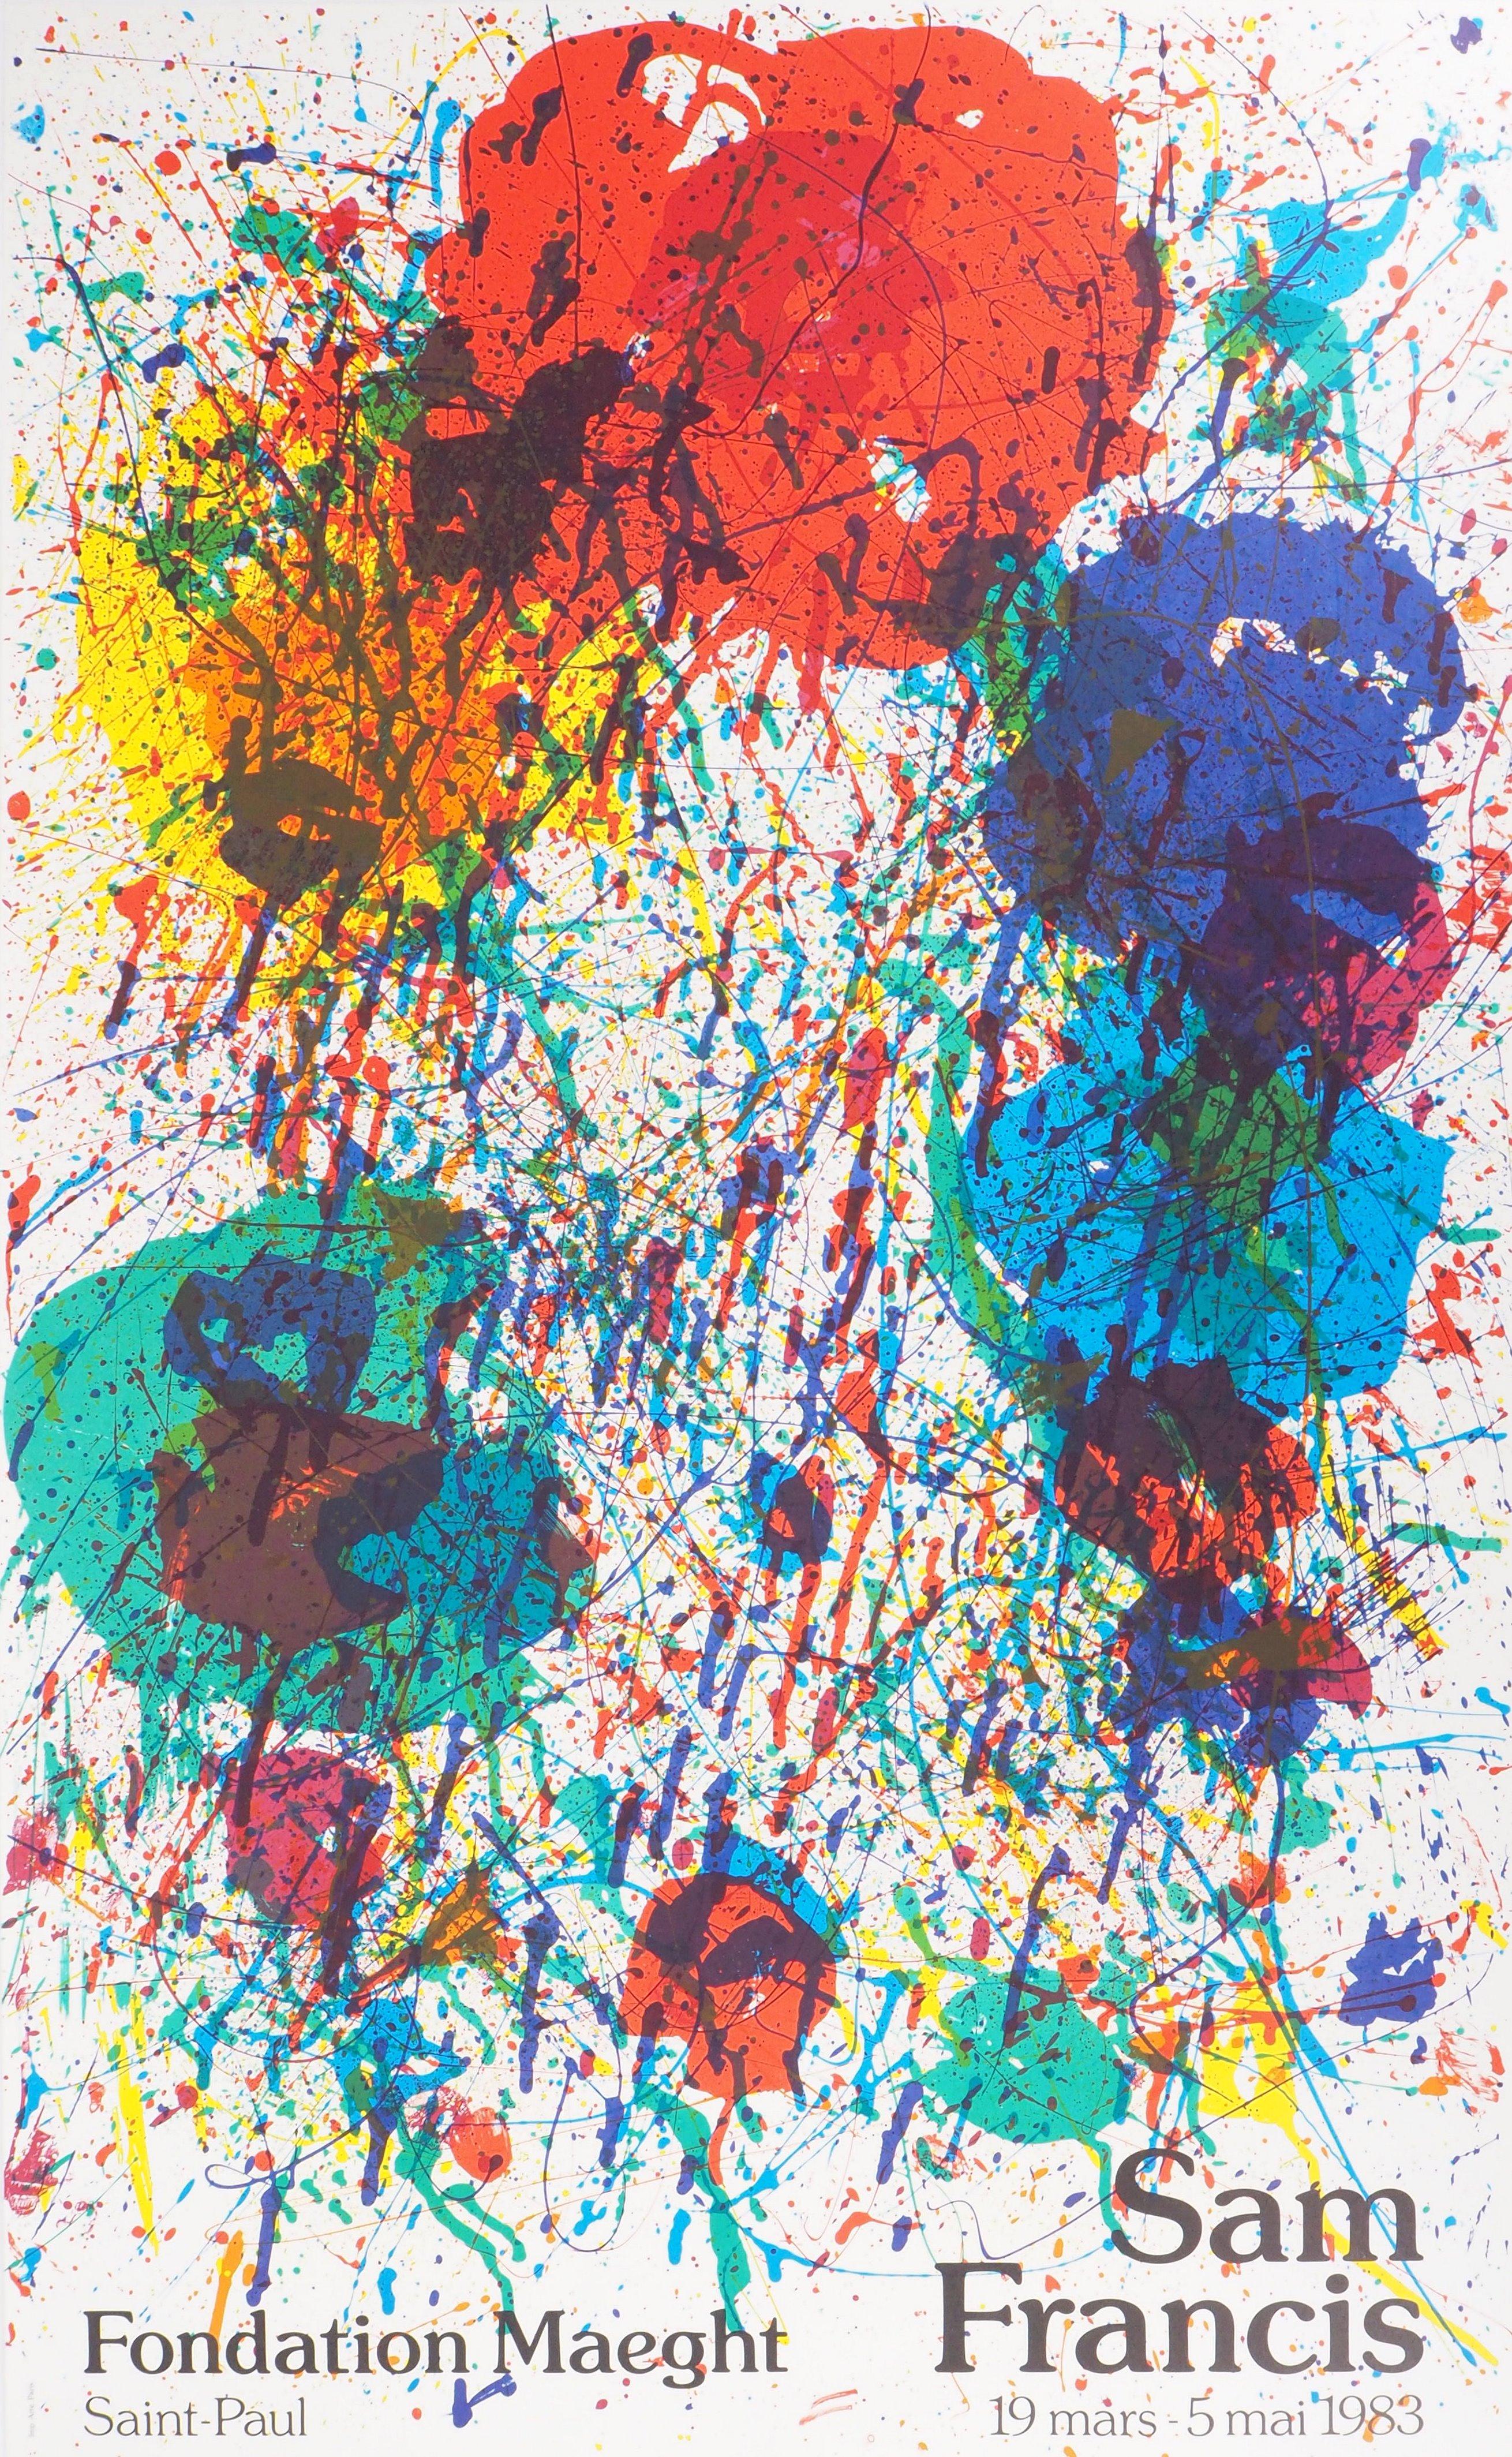 Sam Francis Abstract Print – Farb Explosion – Original-Lithographie ( Maeght 1983)